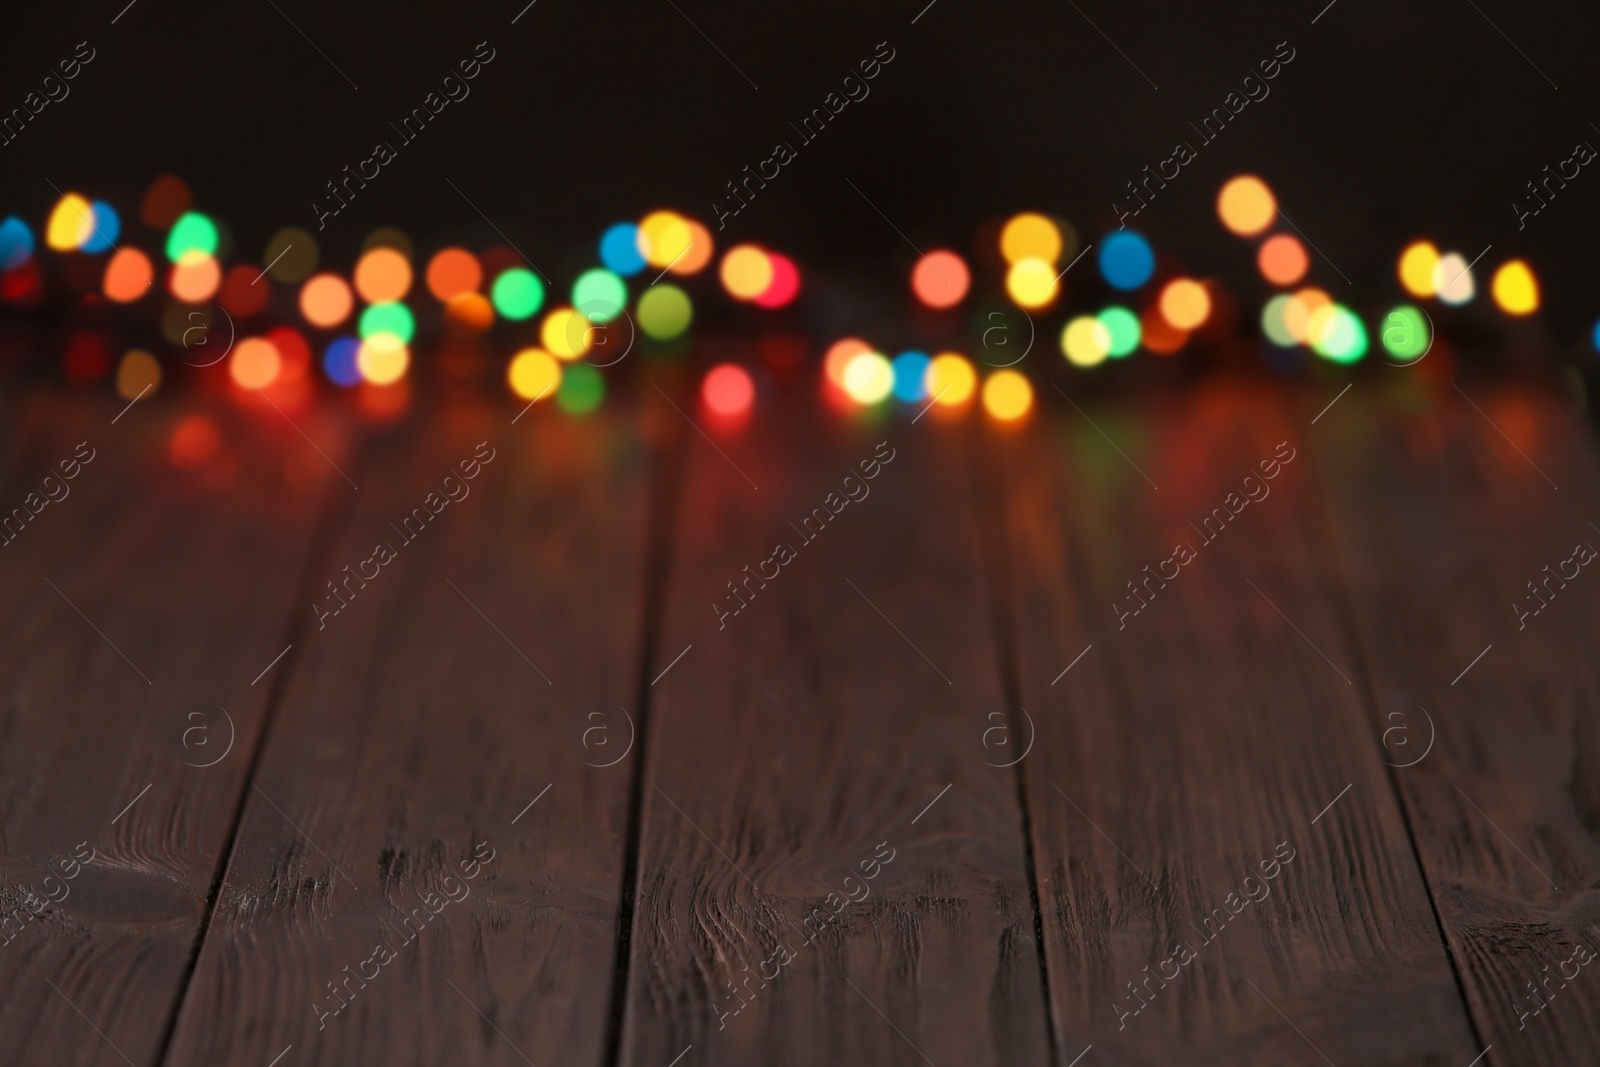 Photo of Colorful lights on wooden table, blurred view. Space for text